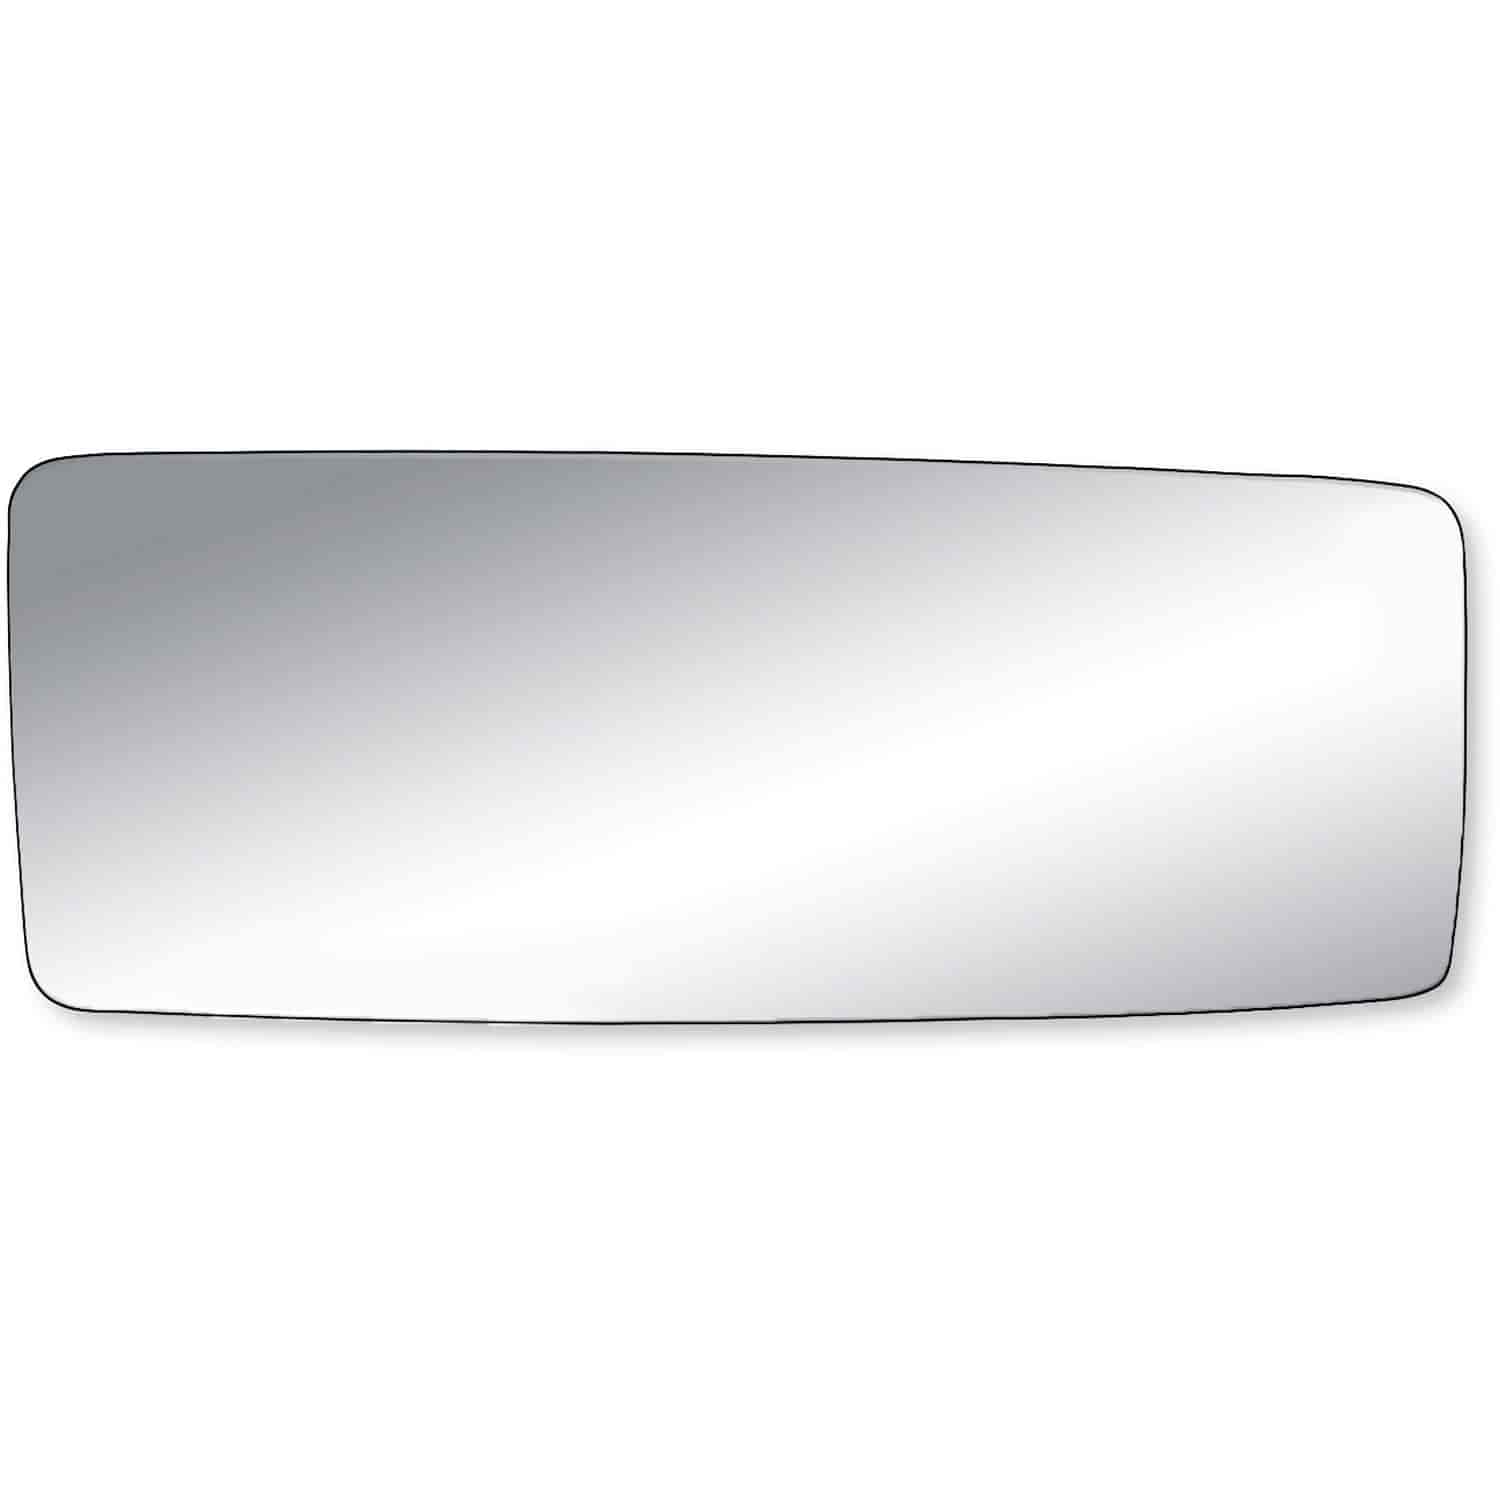 Replacement Glass for 04-12 F150 towing mirror bottom